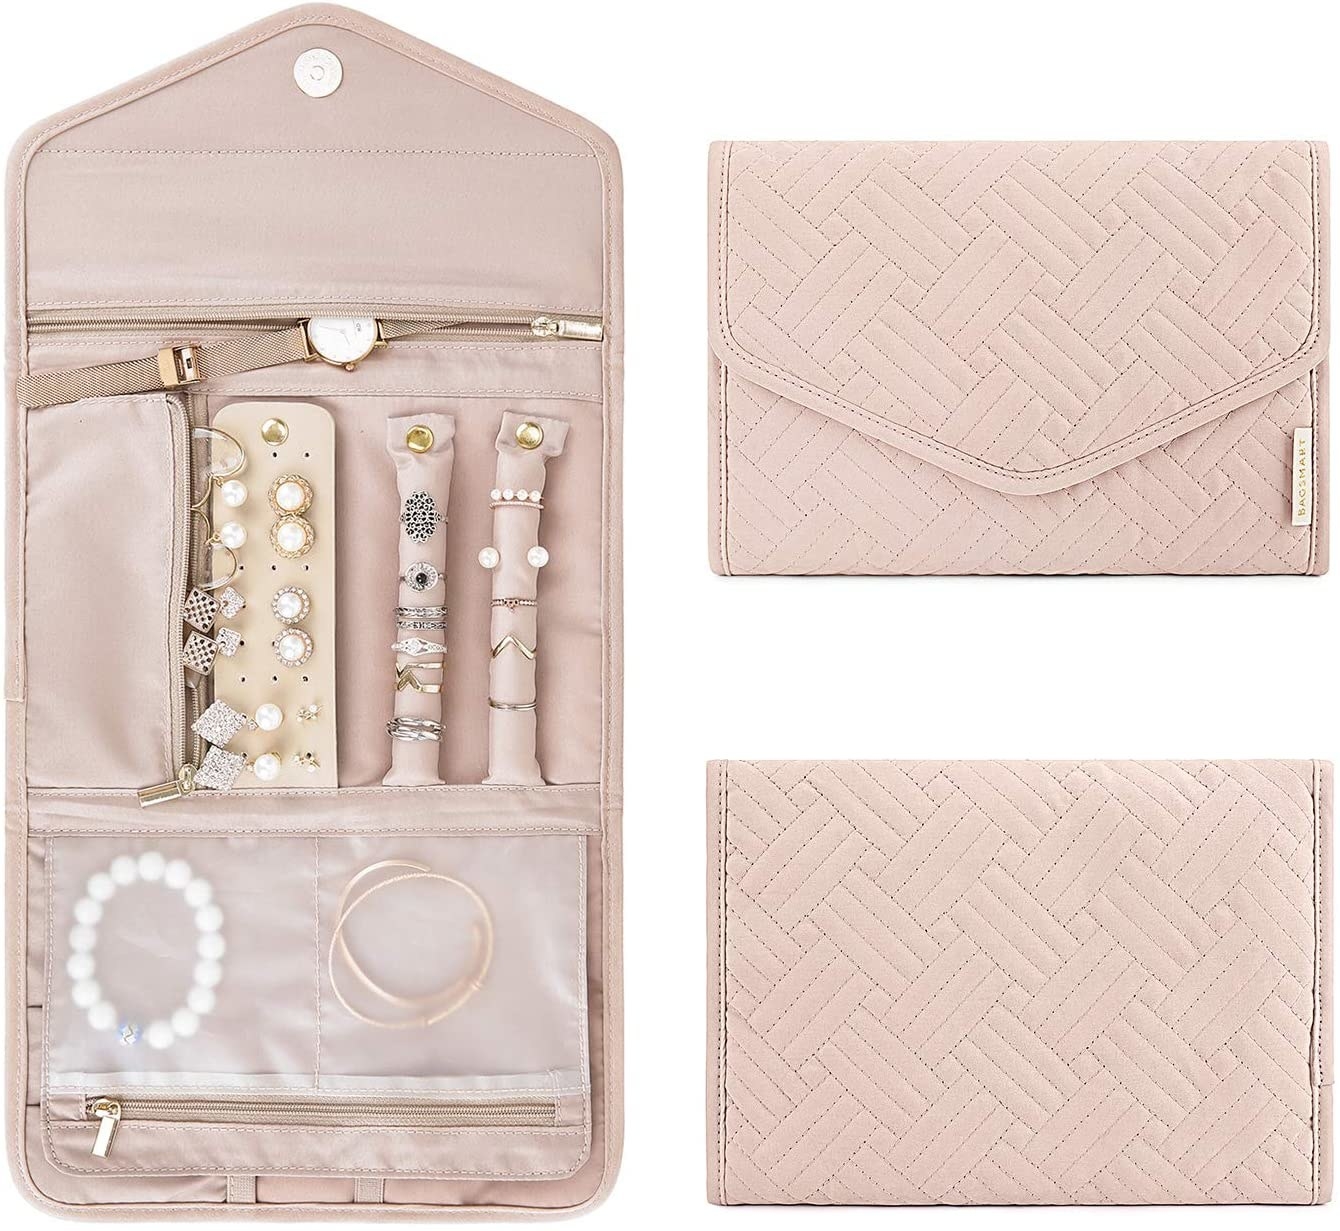 envelope-like jewelry case with several compartments